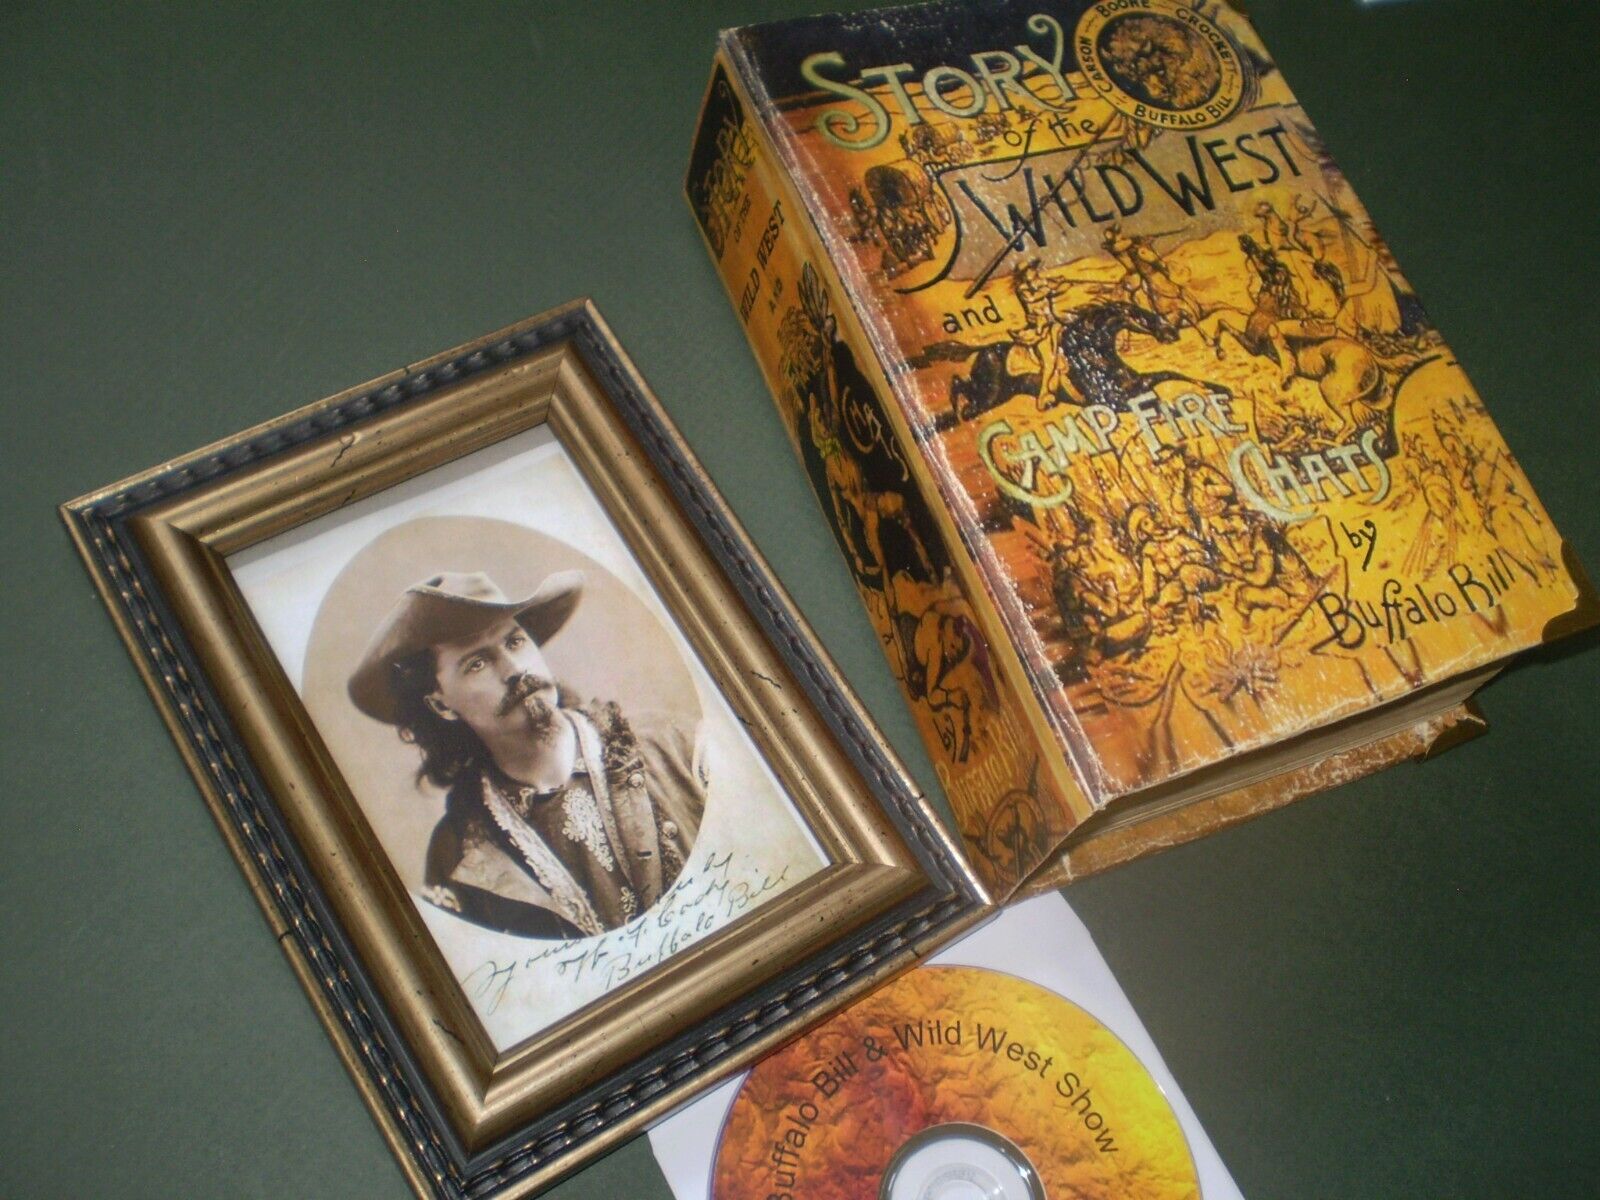 Story of the Wild West -Buffalo Bill Book- 1888  & West Show DVD & Picture